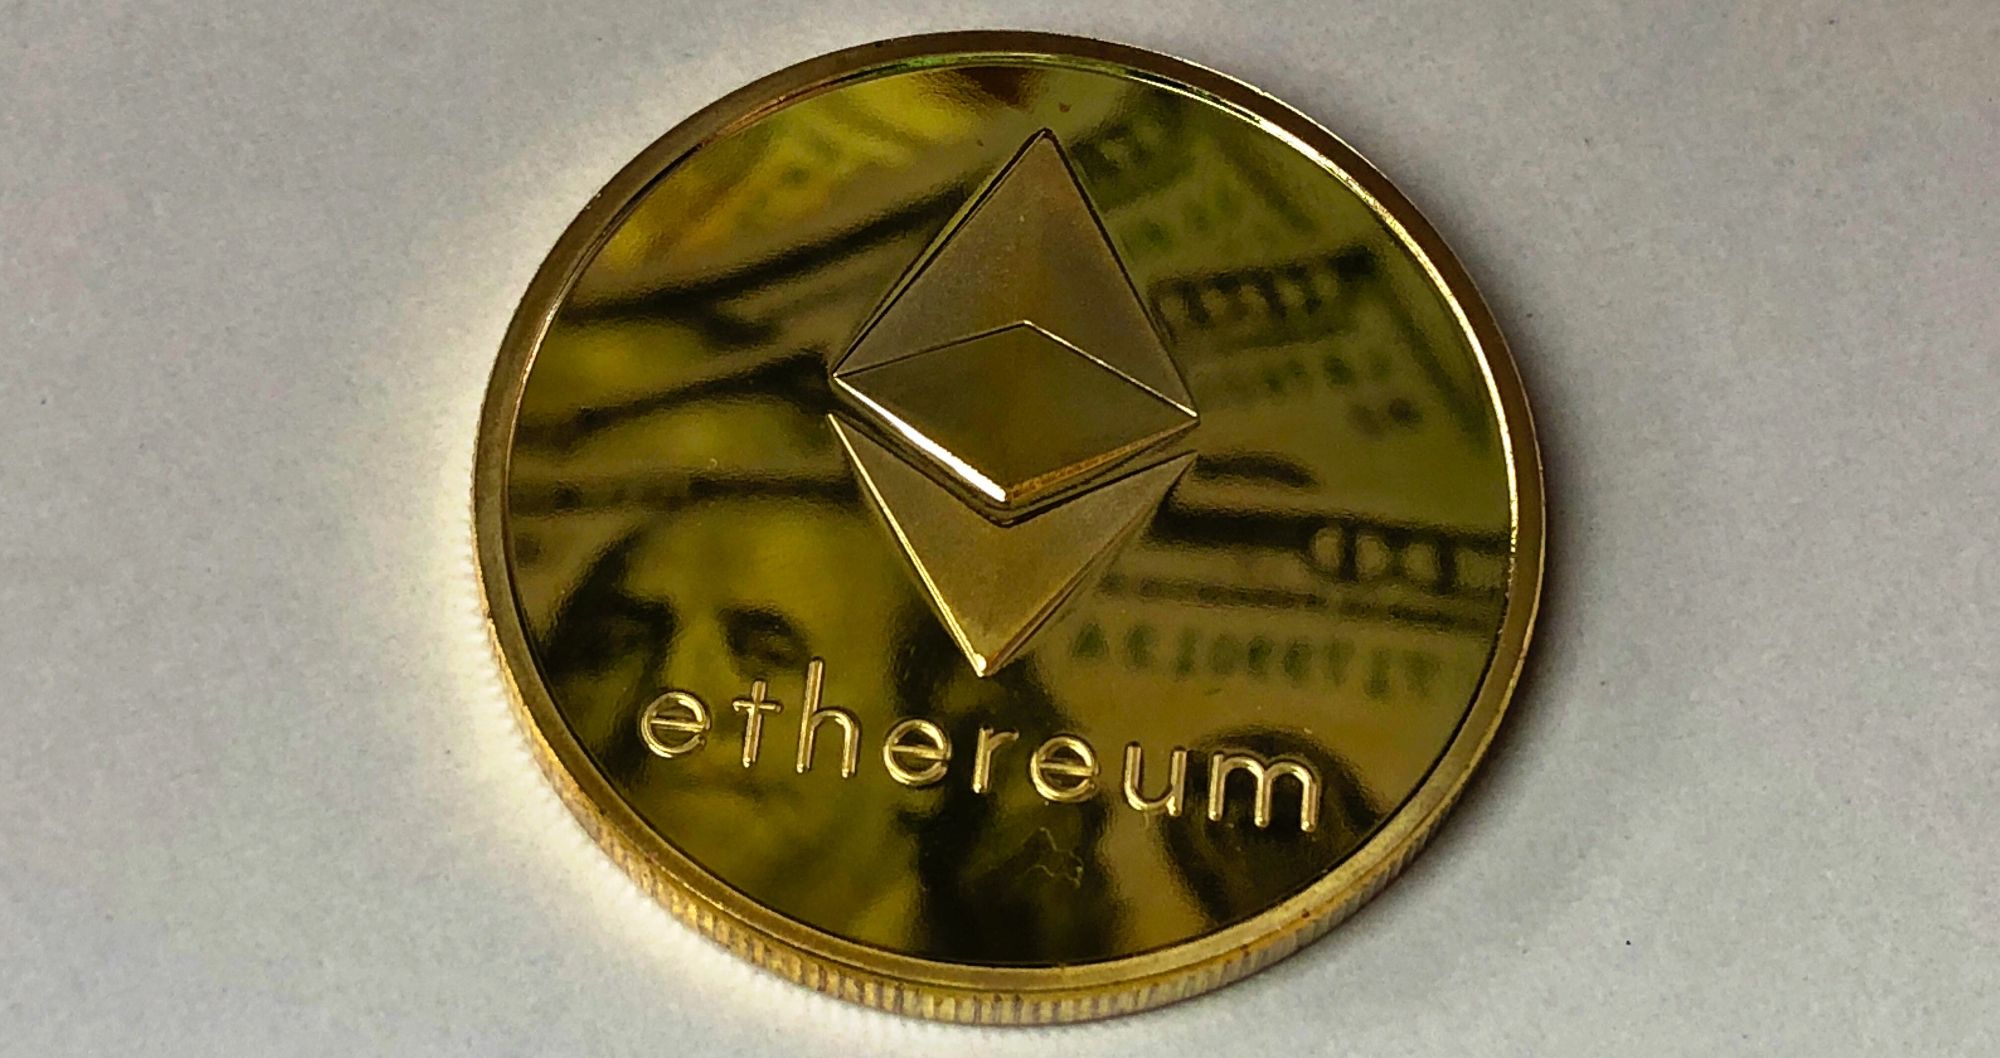 ethereum coin with american dollars in reflection